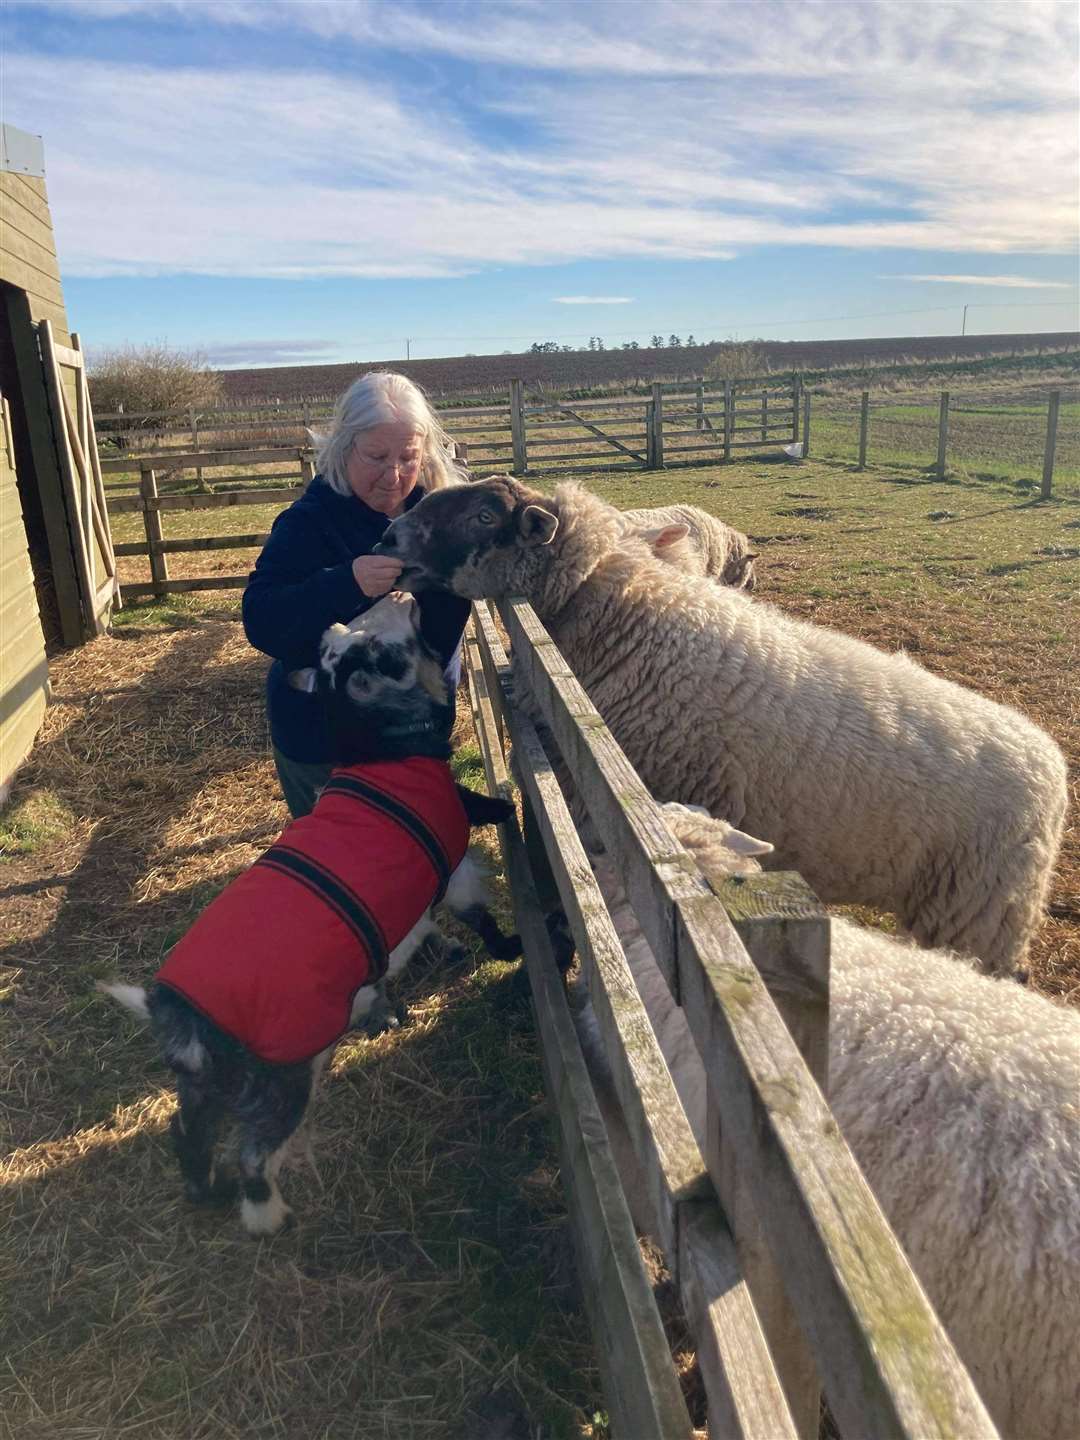 Linda with a few of her beloved animals.